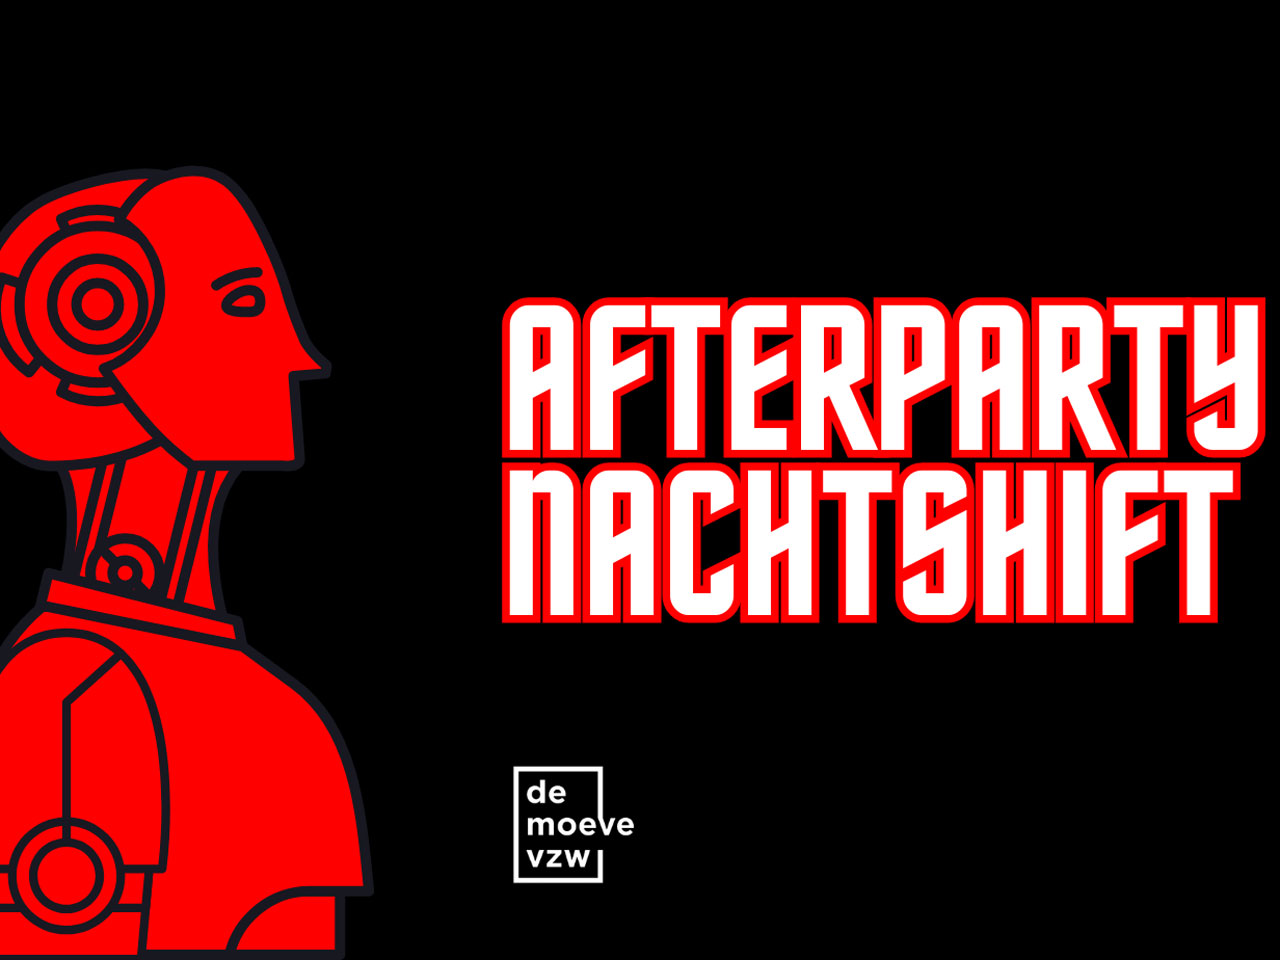 AFTErparty-nachtshift